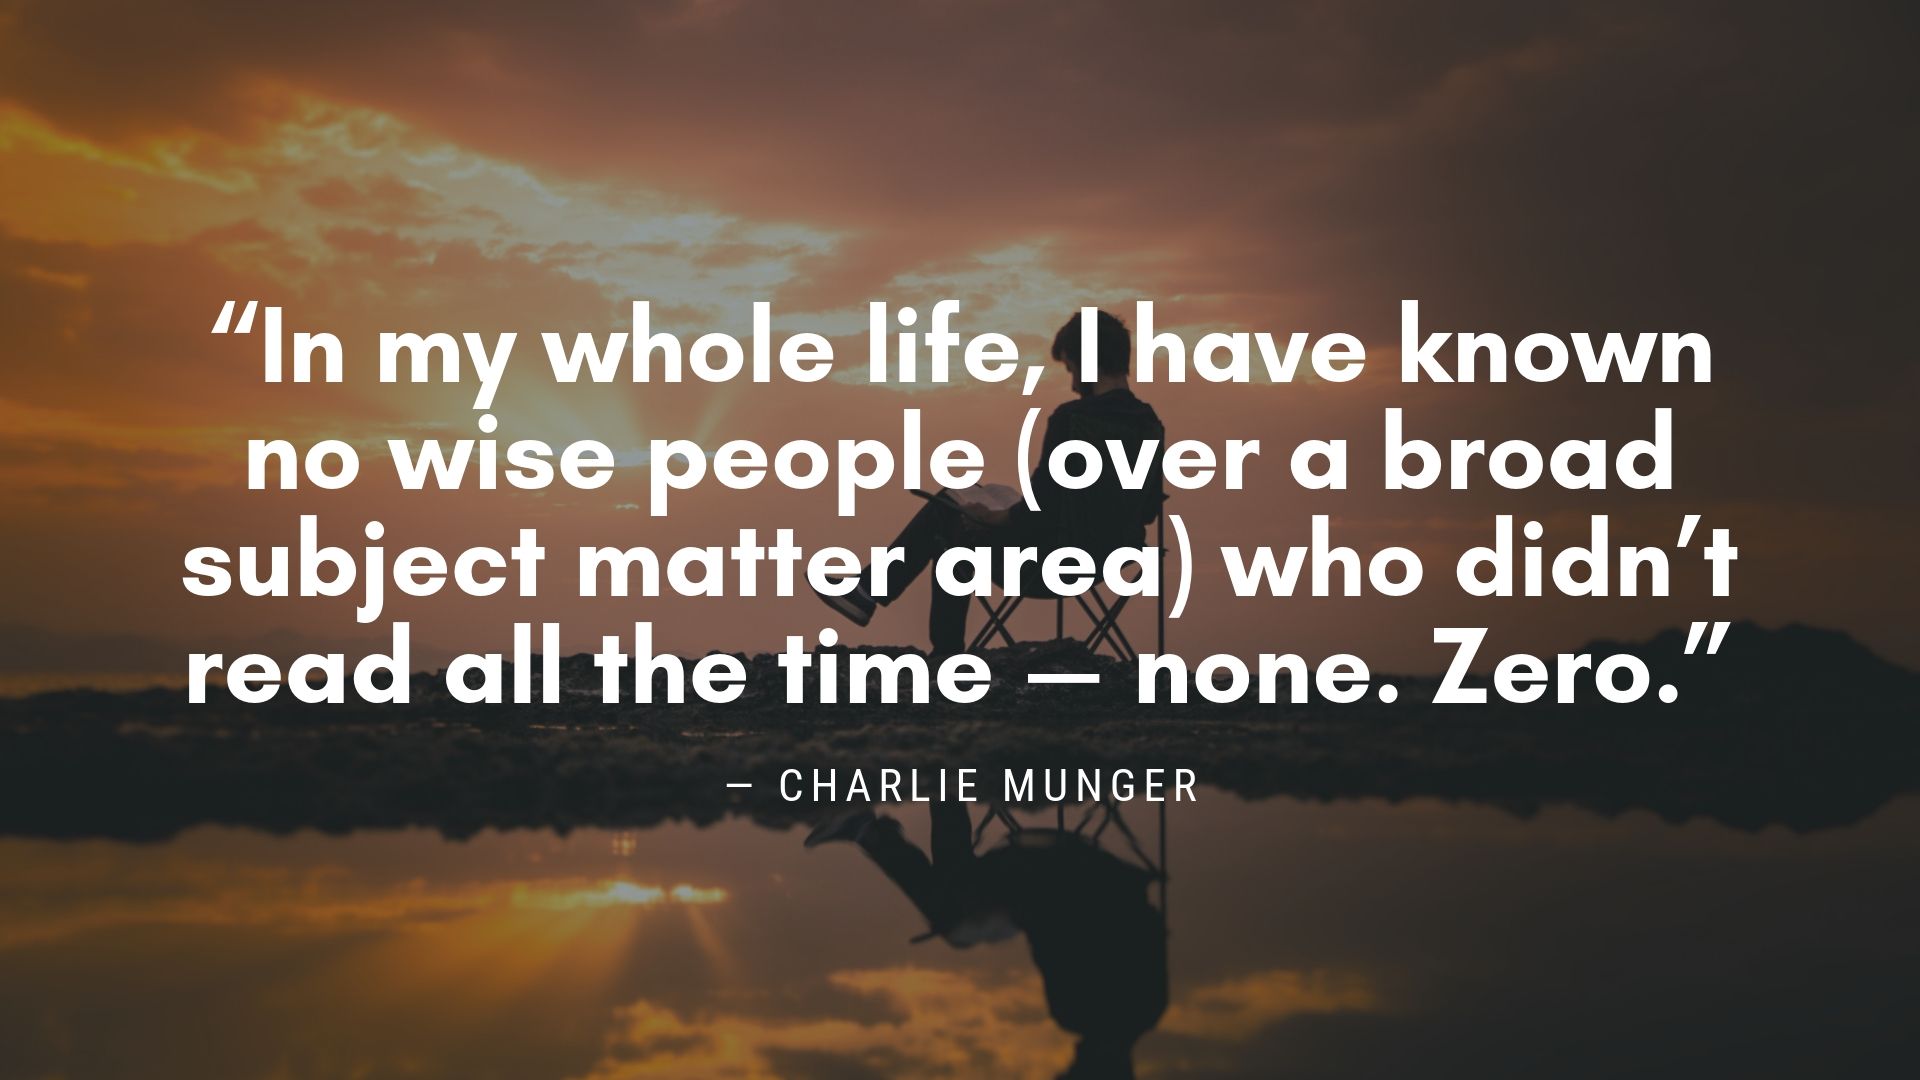 “In my whole life, I have known no wise people (over a broad subject matter area) who didn’t read all the time — none. Zero.” ―  Charlie Munger, Self-Made Billionaire